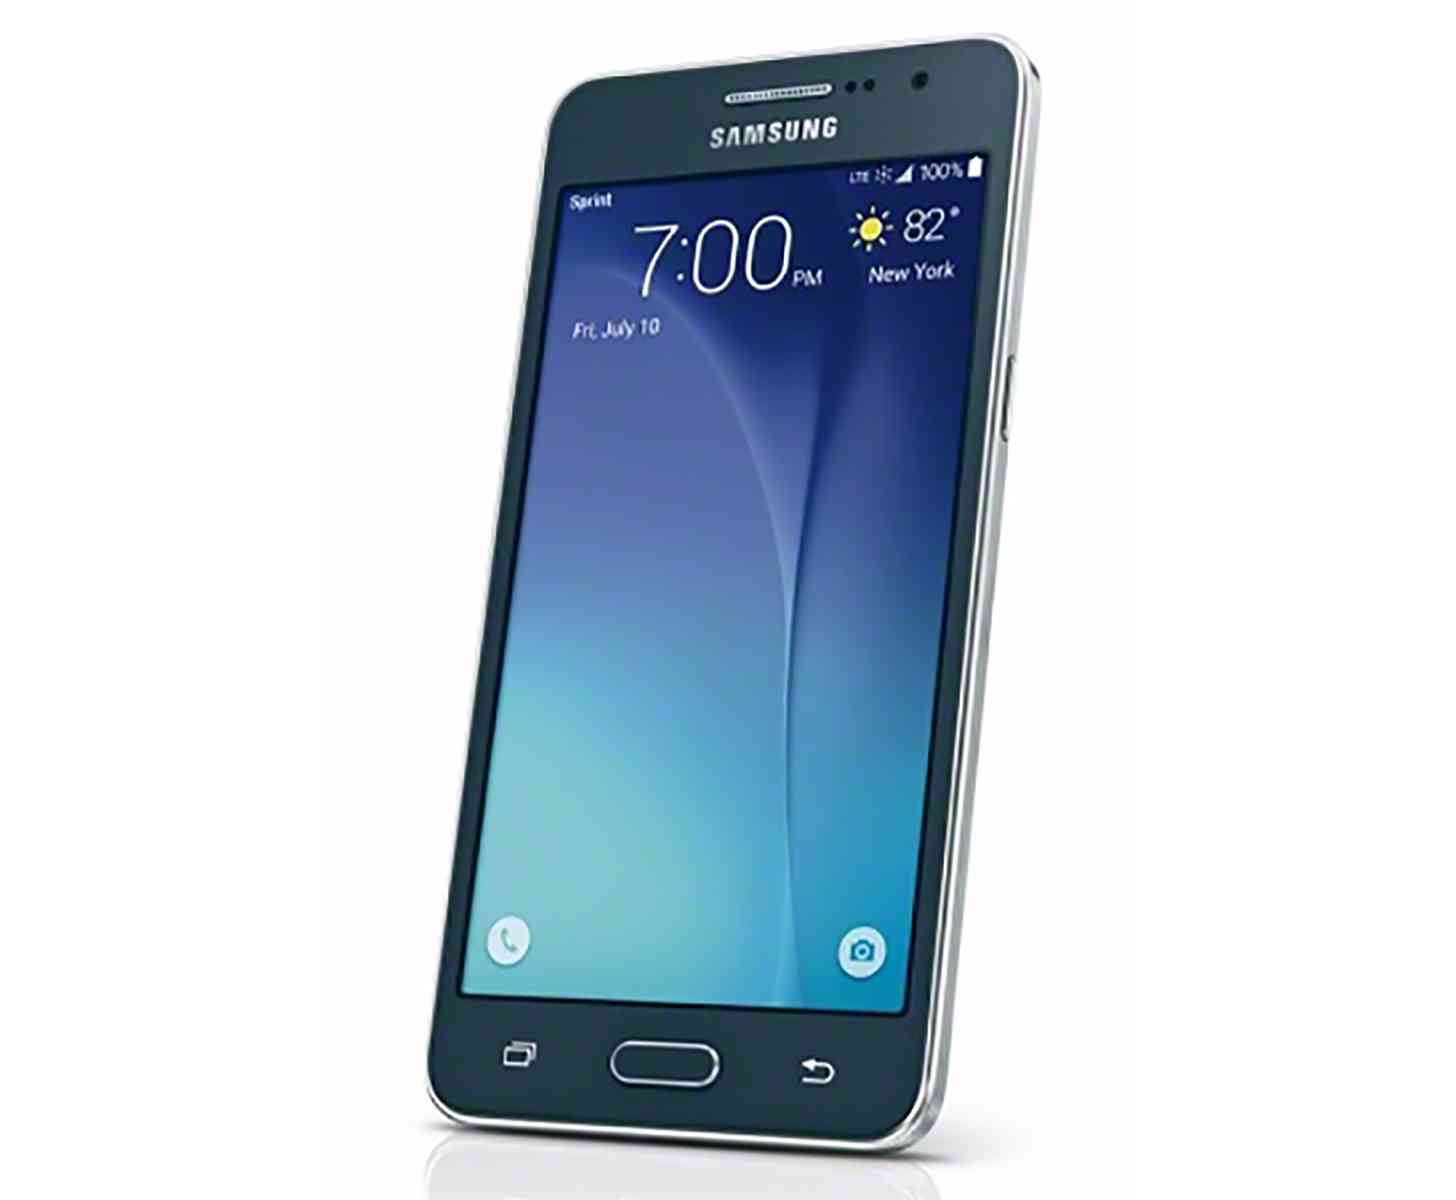 Samsung Galaxy Grand Prime Sprint official large